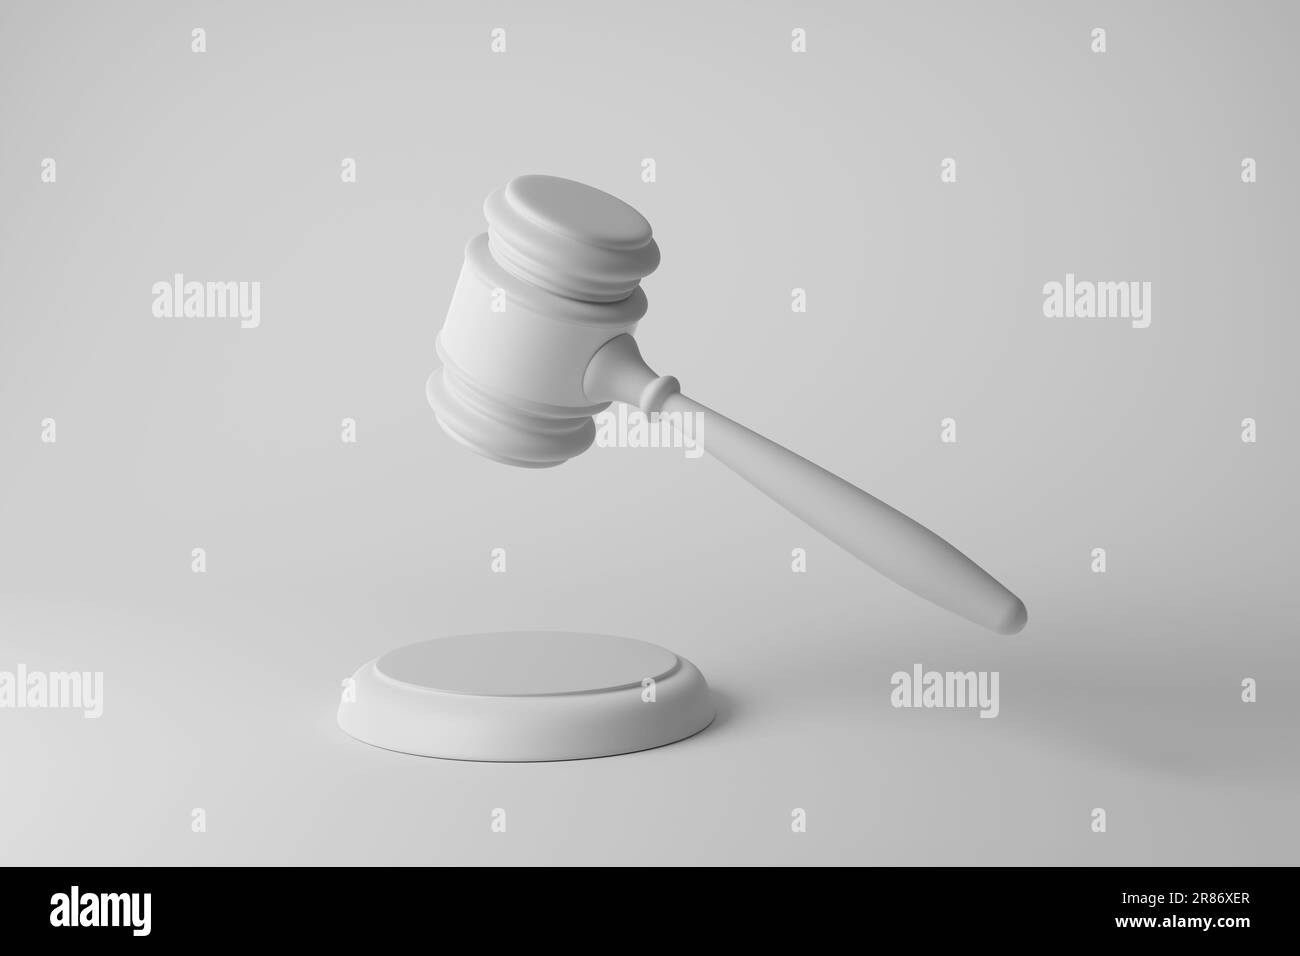 White judge gavel and sound block on white background in monochrome and minimalism. Illustration of legal system, justice and legislation Stock Photo